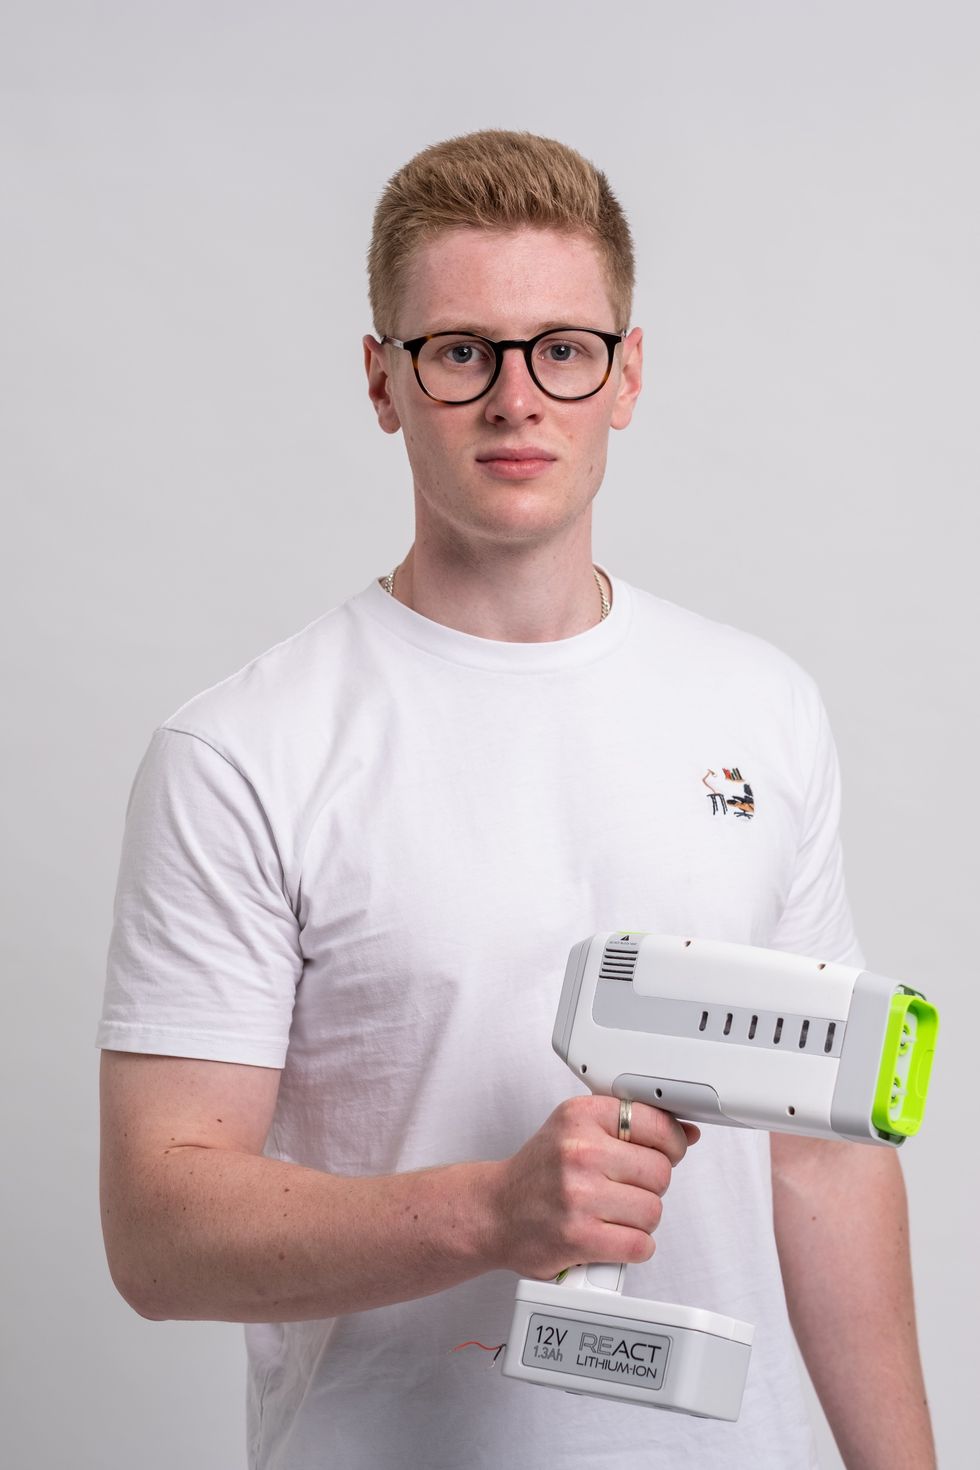 Joseph Bentley, aged 22 from Essex, designs device that can quickly stem blood loss from stab victims (Dyson/PA)